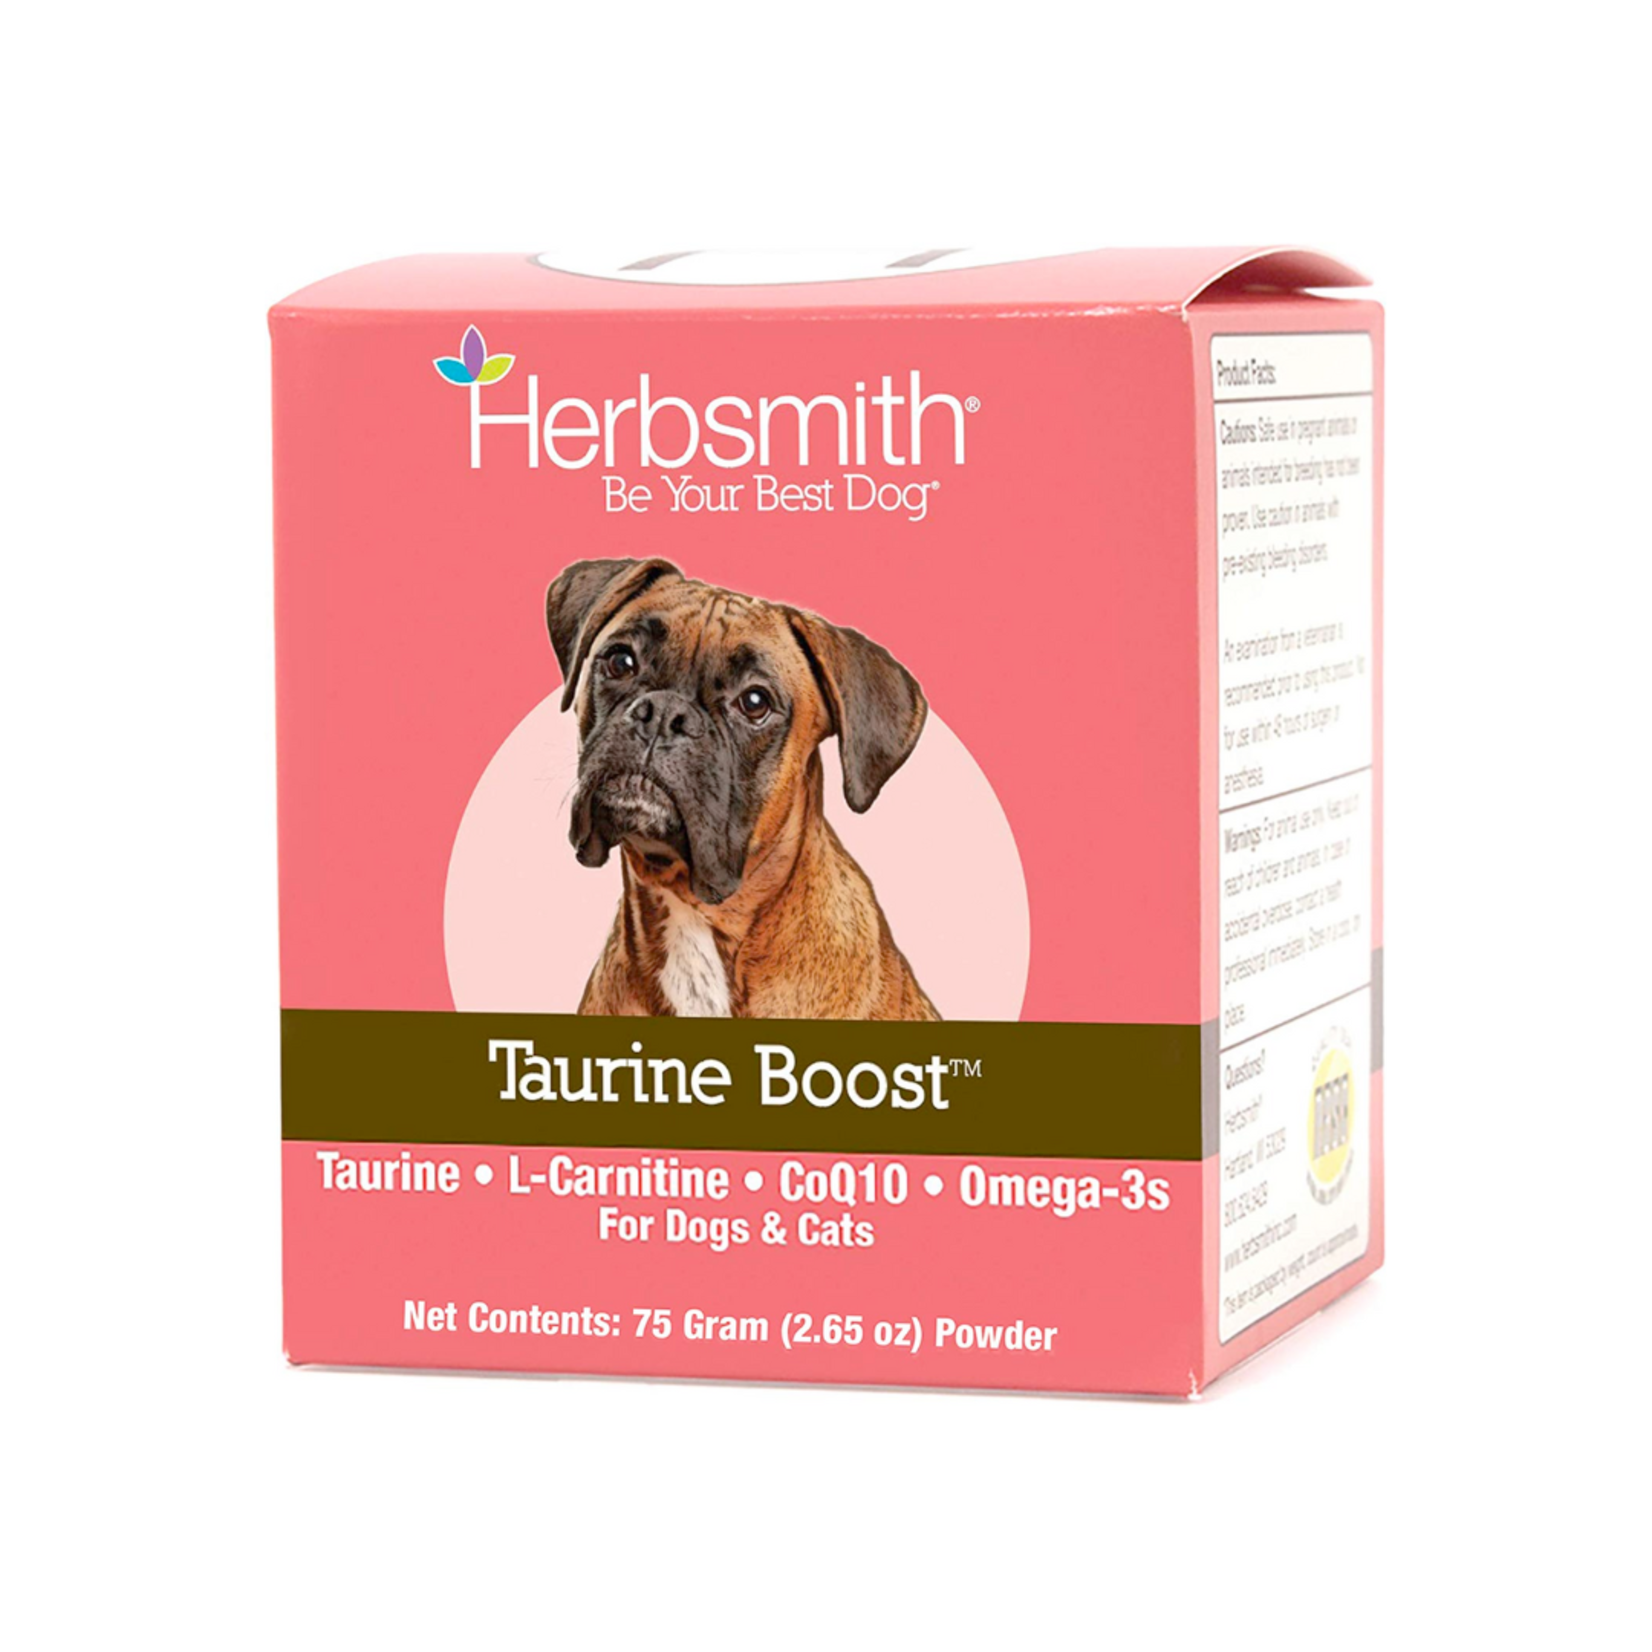 Herbsmith Taurine Boost Powder for Dogs & Cats - Herbsmith